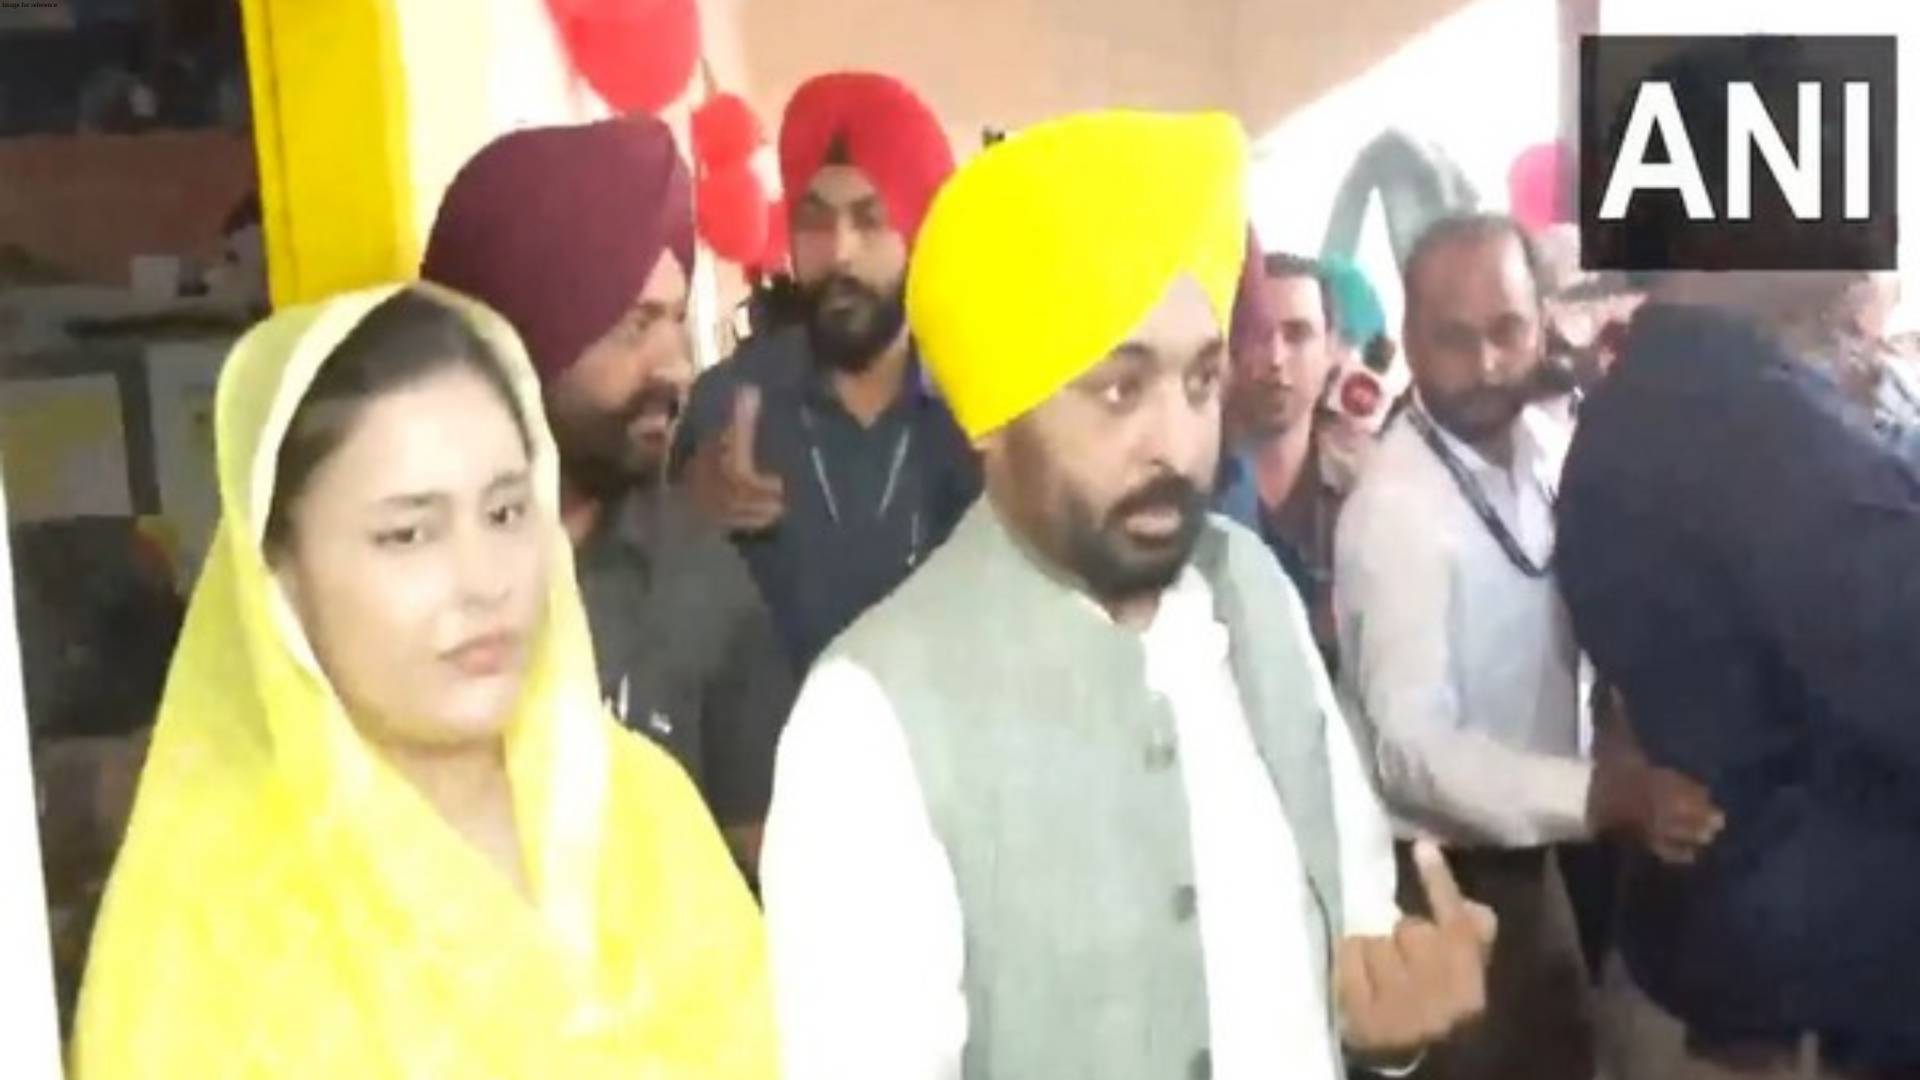 Punjab CM Bhagwant Mann, his wife cast vote in Sangrur, appeal to people to 